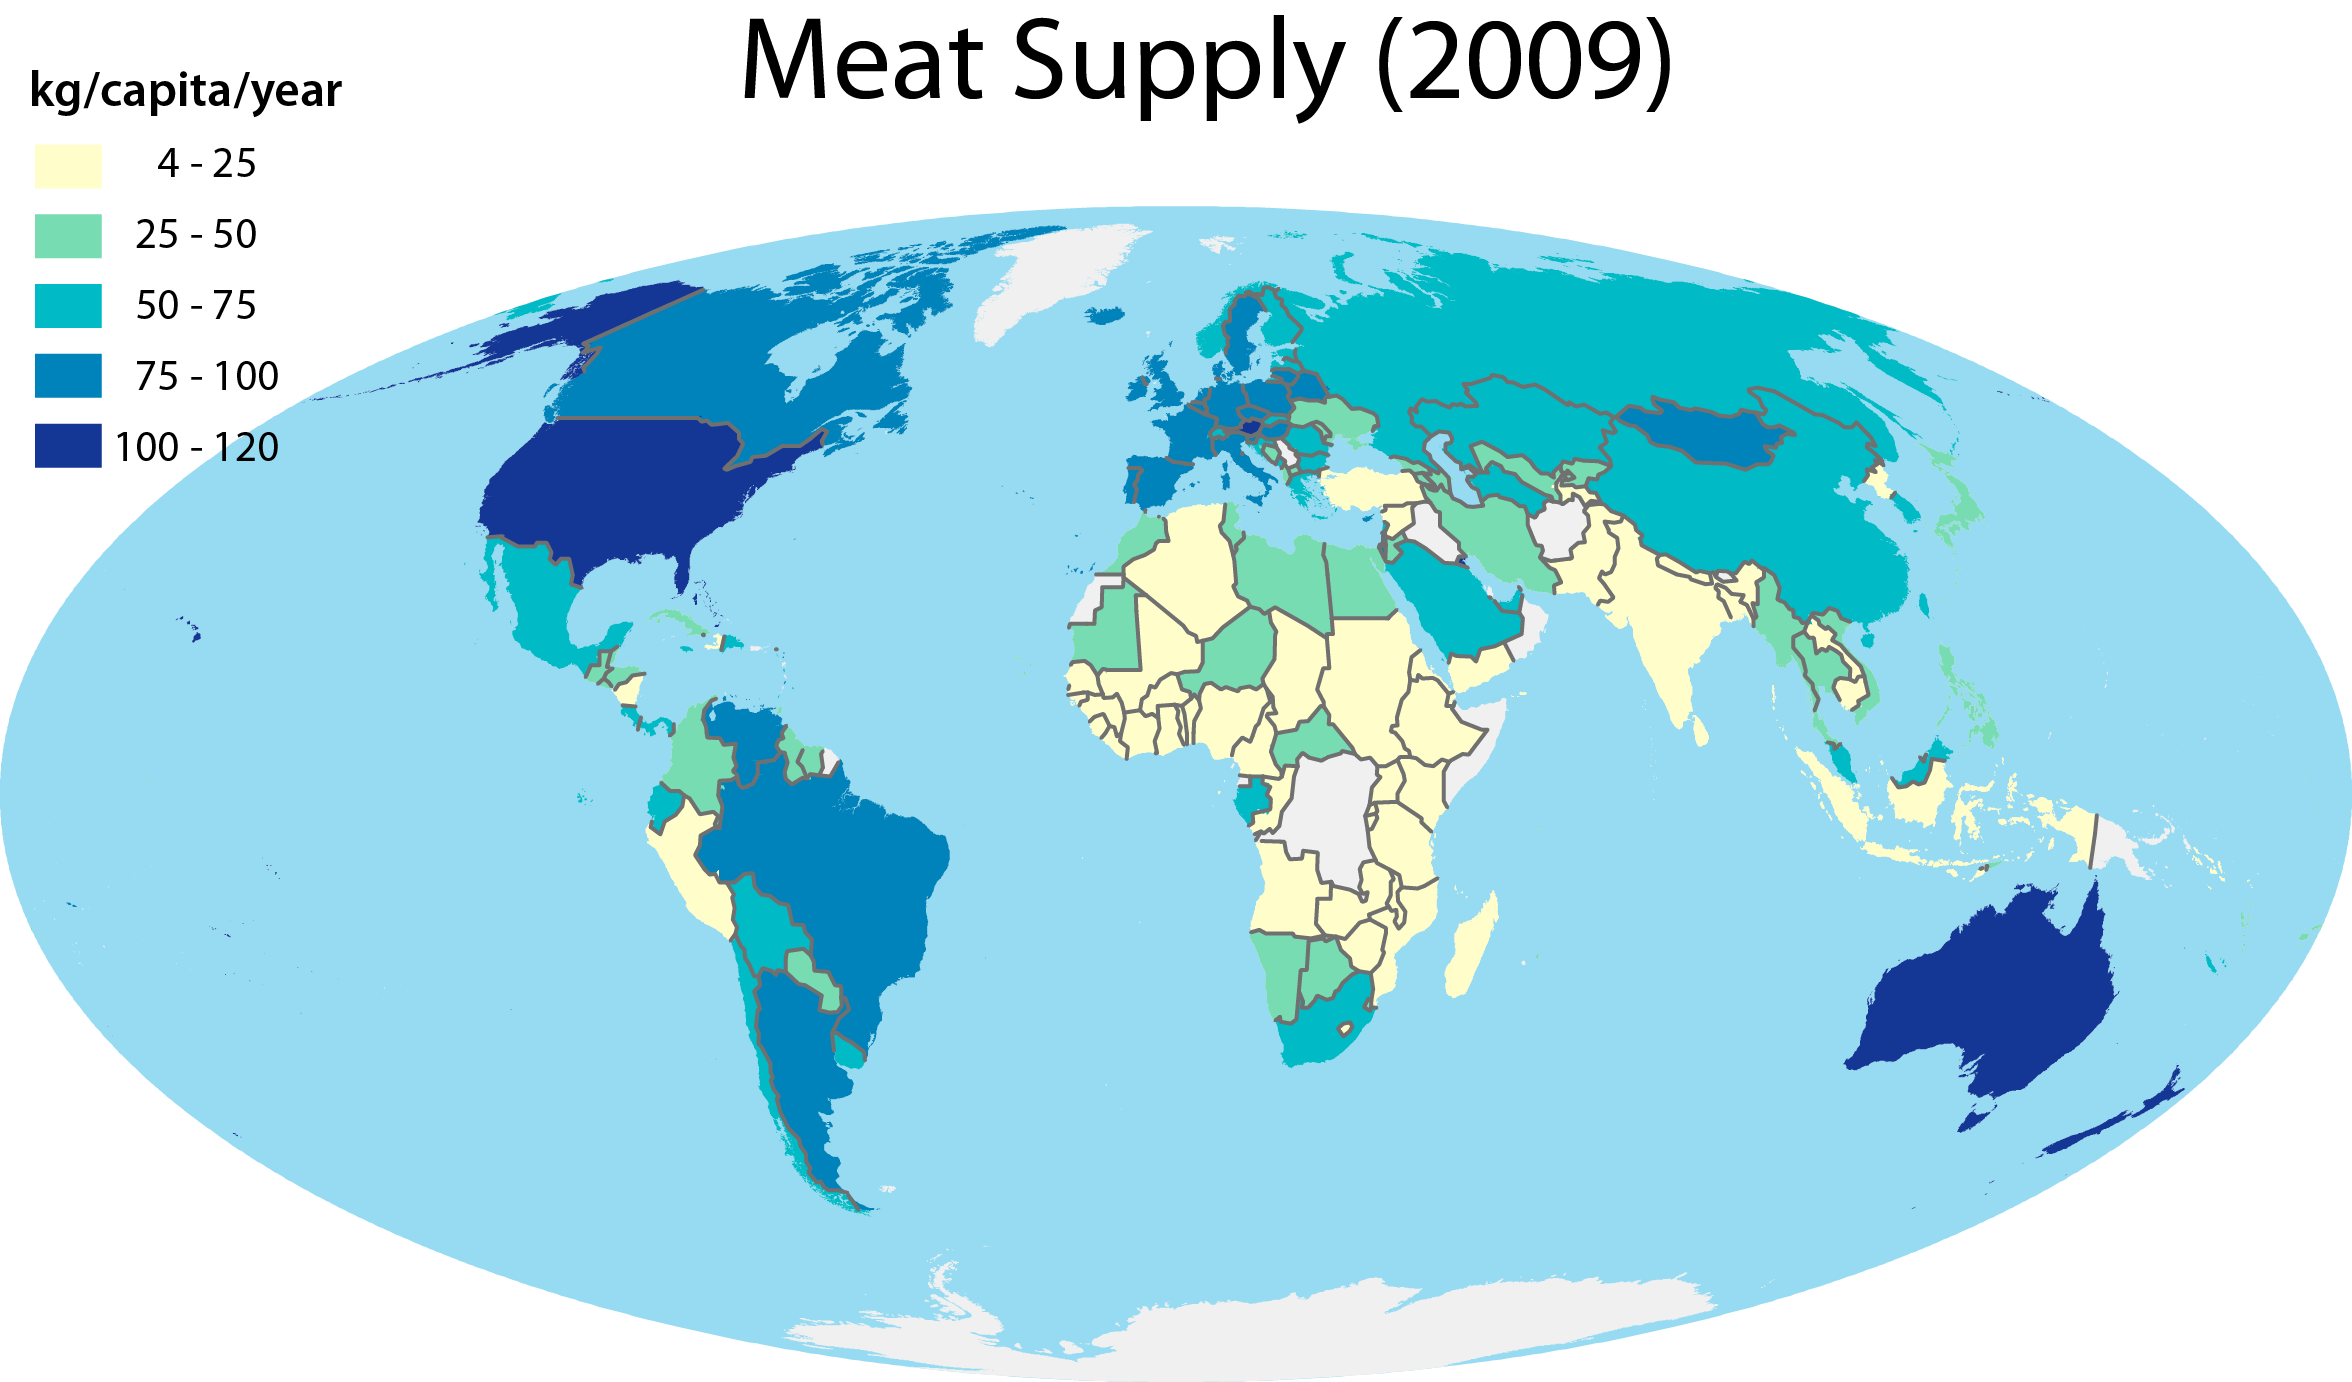 Growing Greenhouse Gas Emissions Due to Meat Production